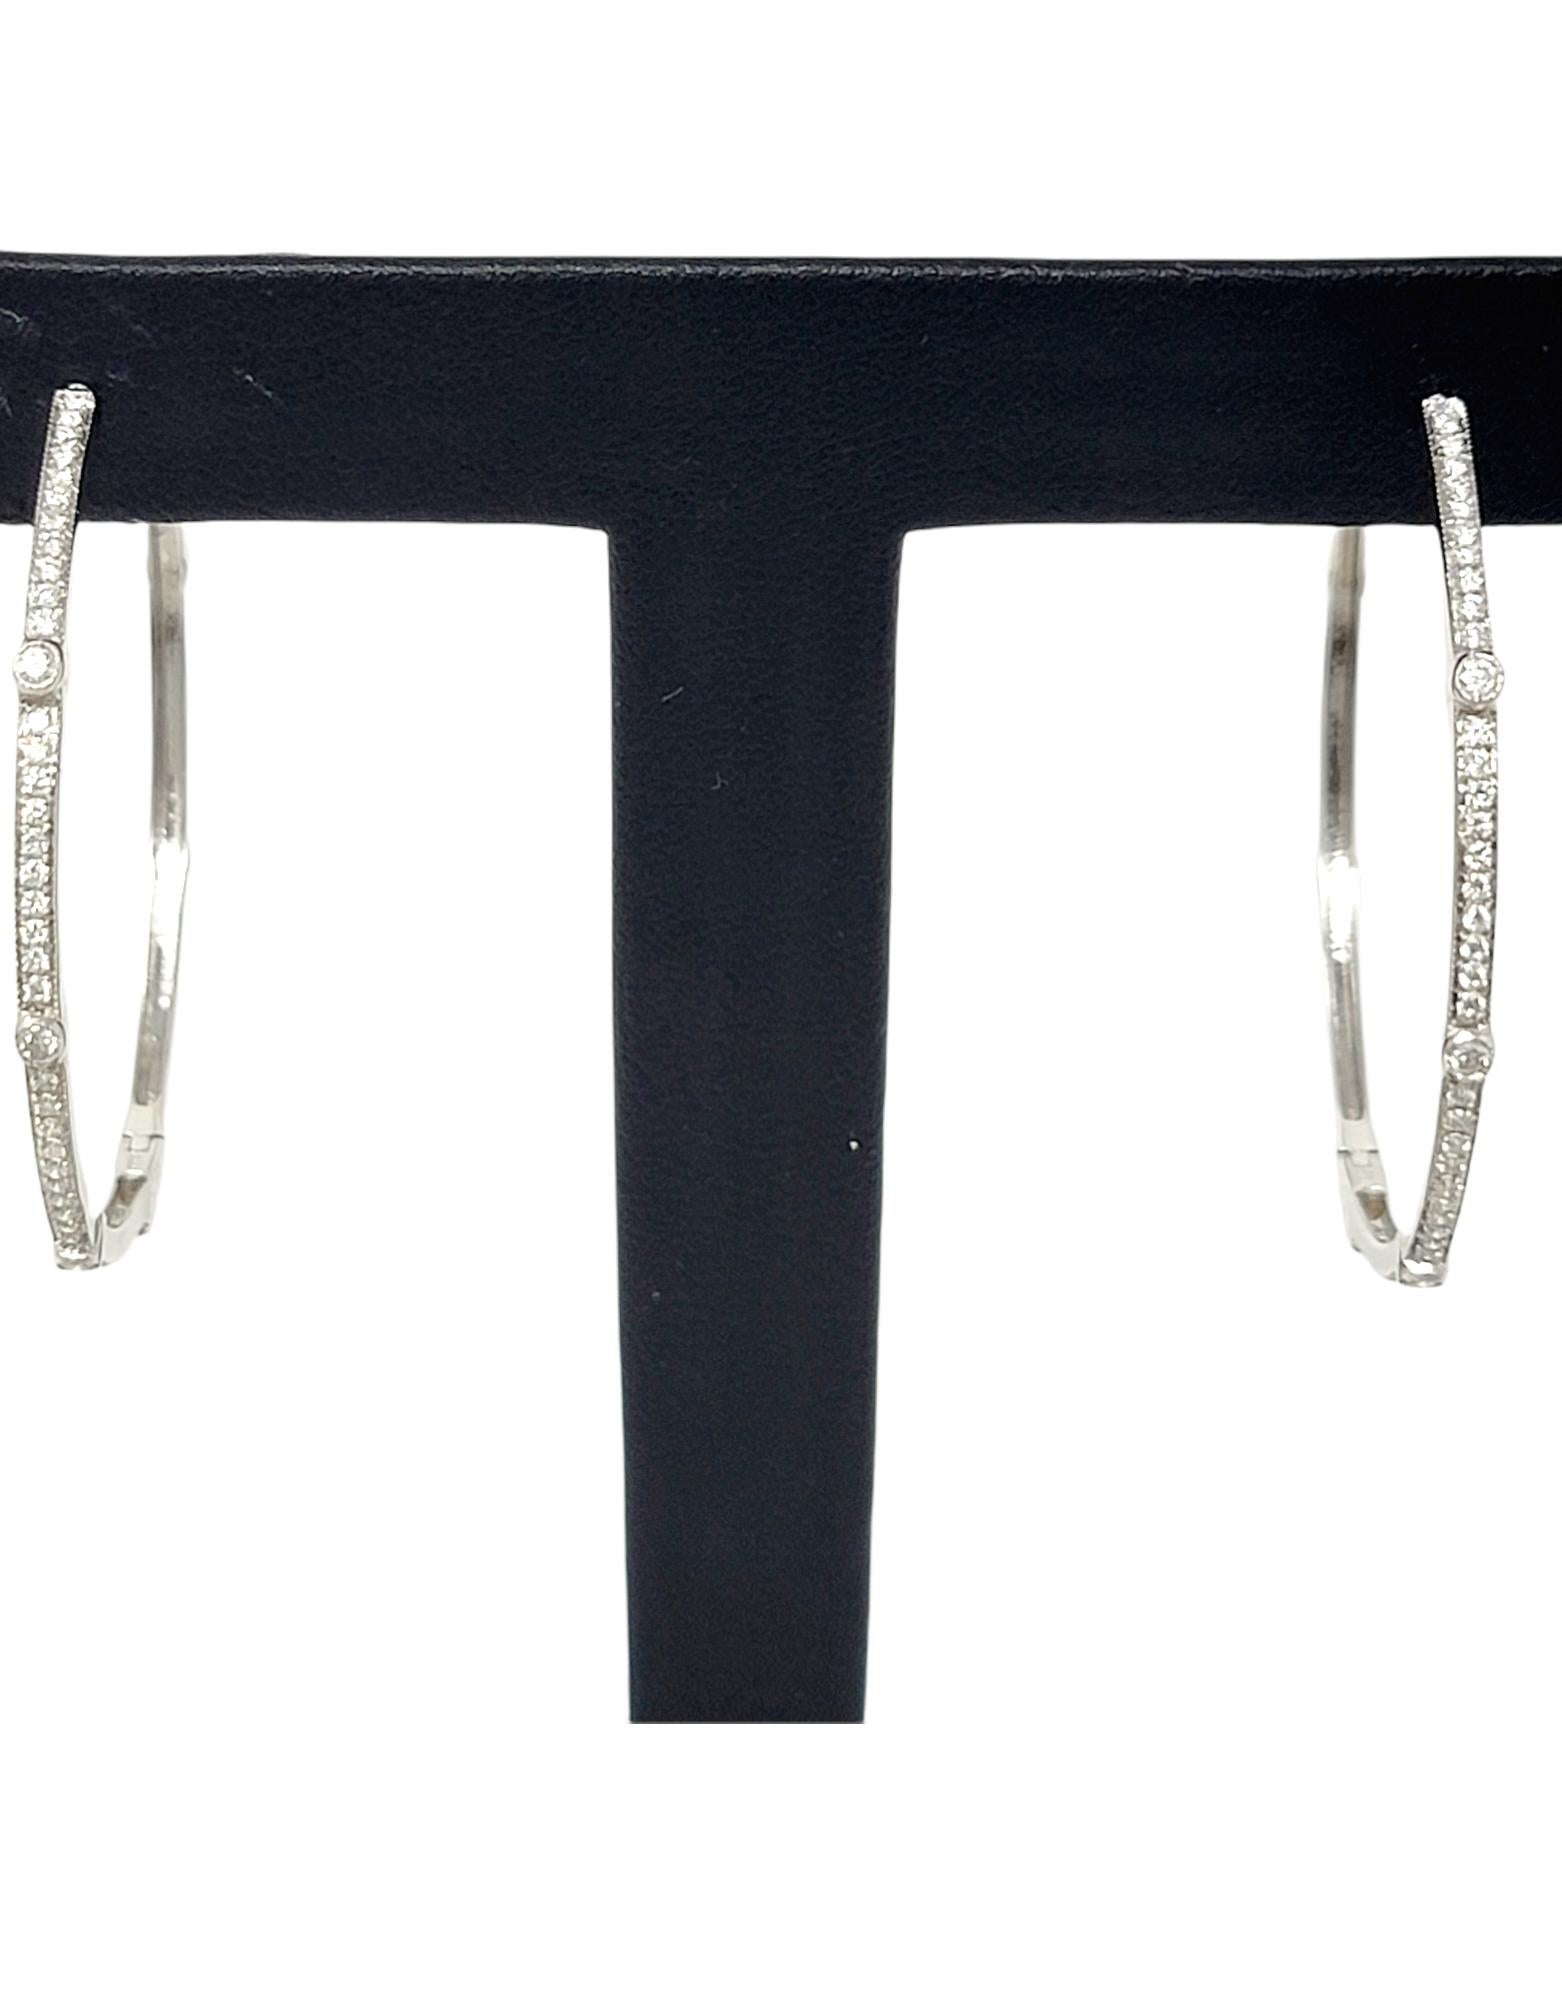 .75 Carats Total Round Diamond Station Hoop Earrings 18 Karat White Gold For Sale 3